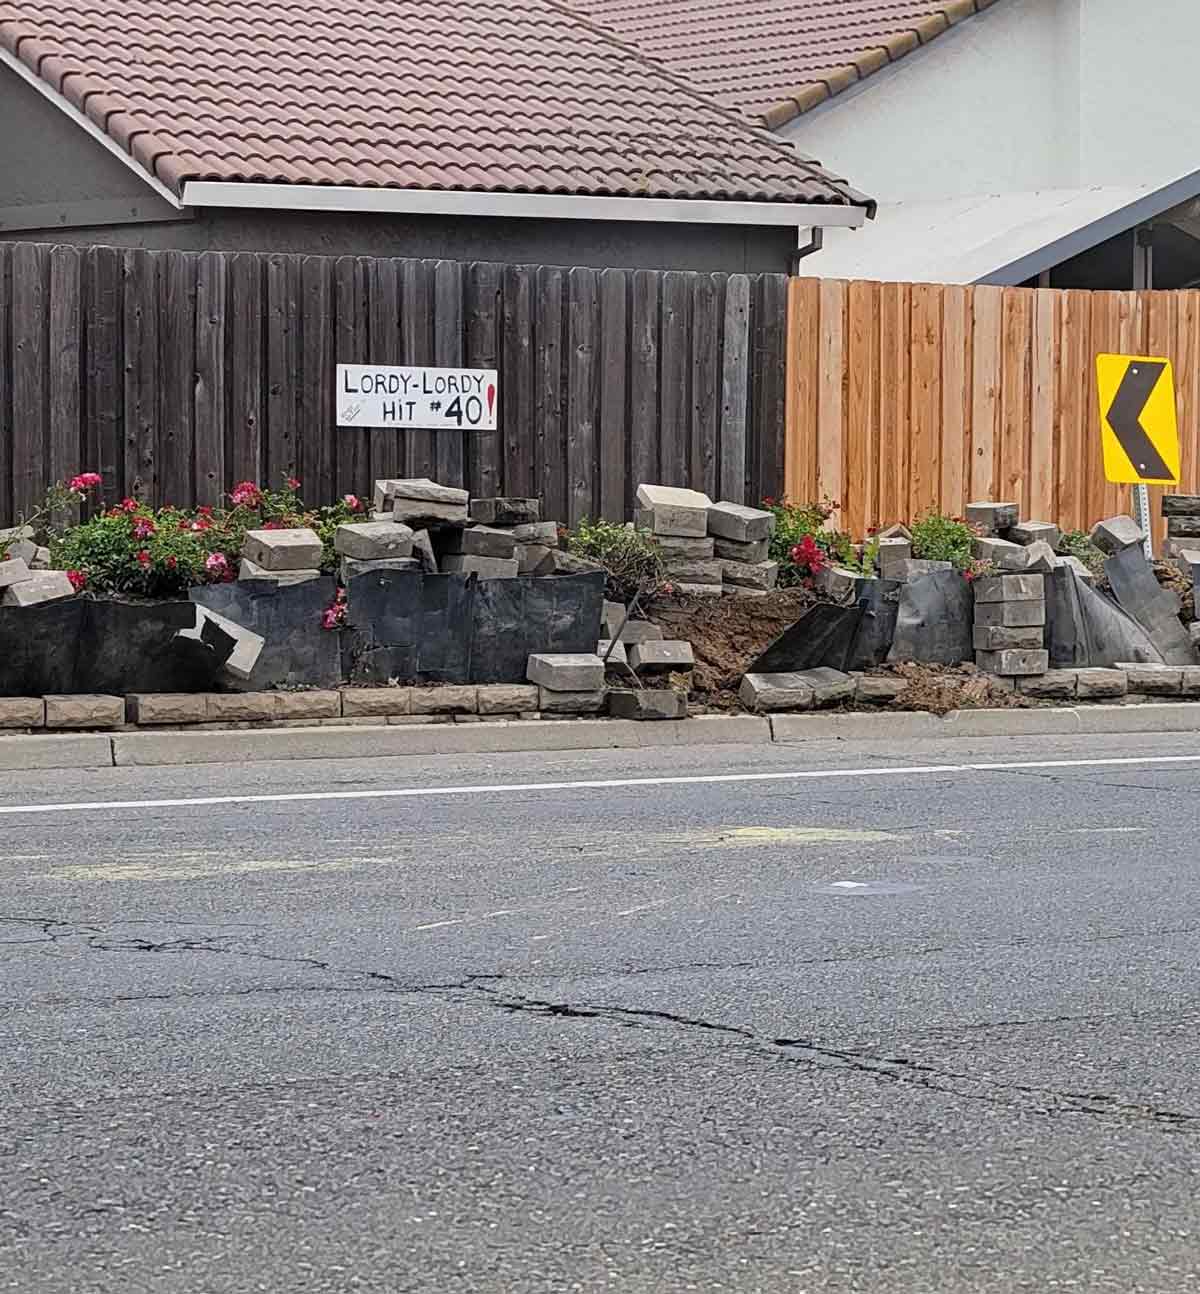 Someone puts a sign up every time someone crashes into this planter